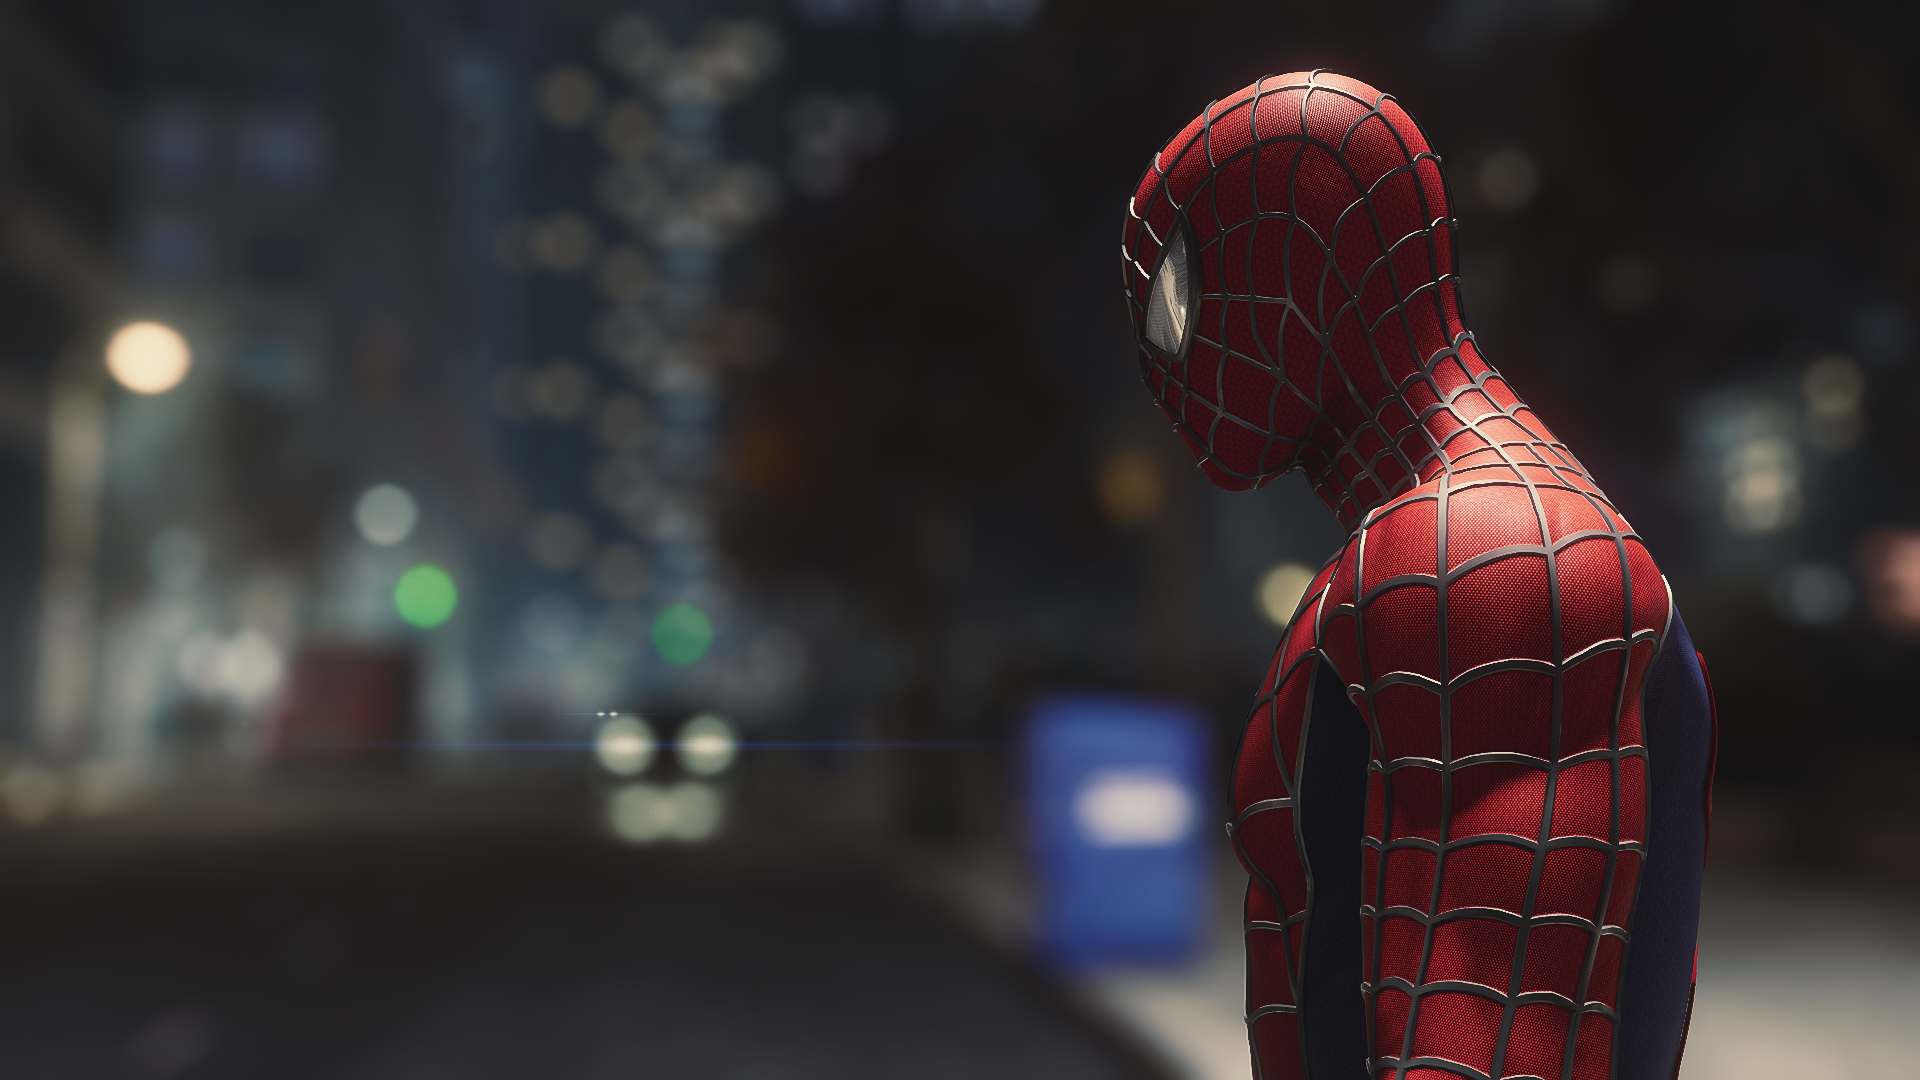 General 1920x1080 Spider-Man Remastered red blue night video games superhero Marvel Comics bodysuit Insomniac Games blurred video game art screen shot video game characters CGI blurry background muscles side view